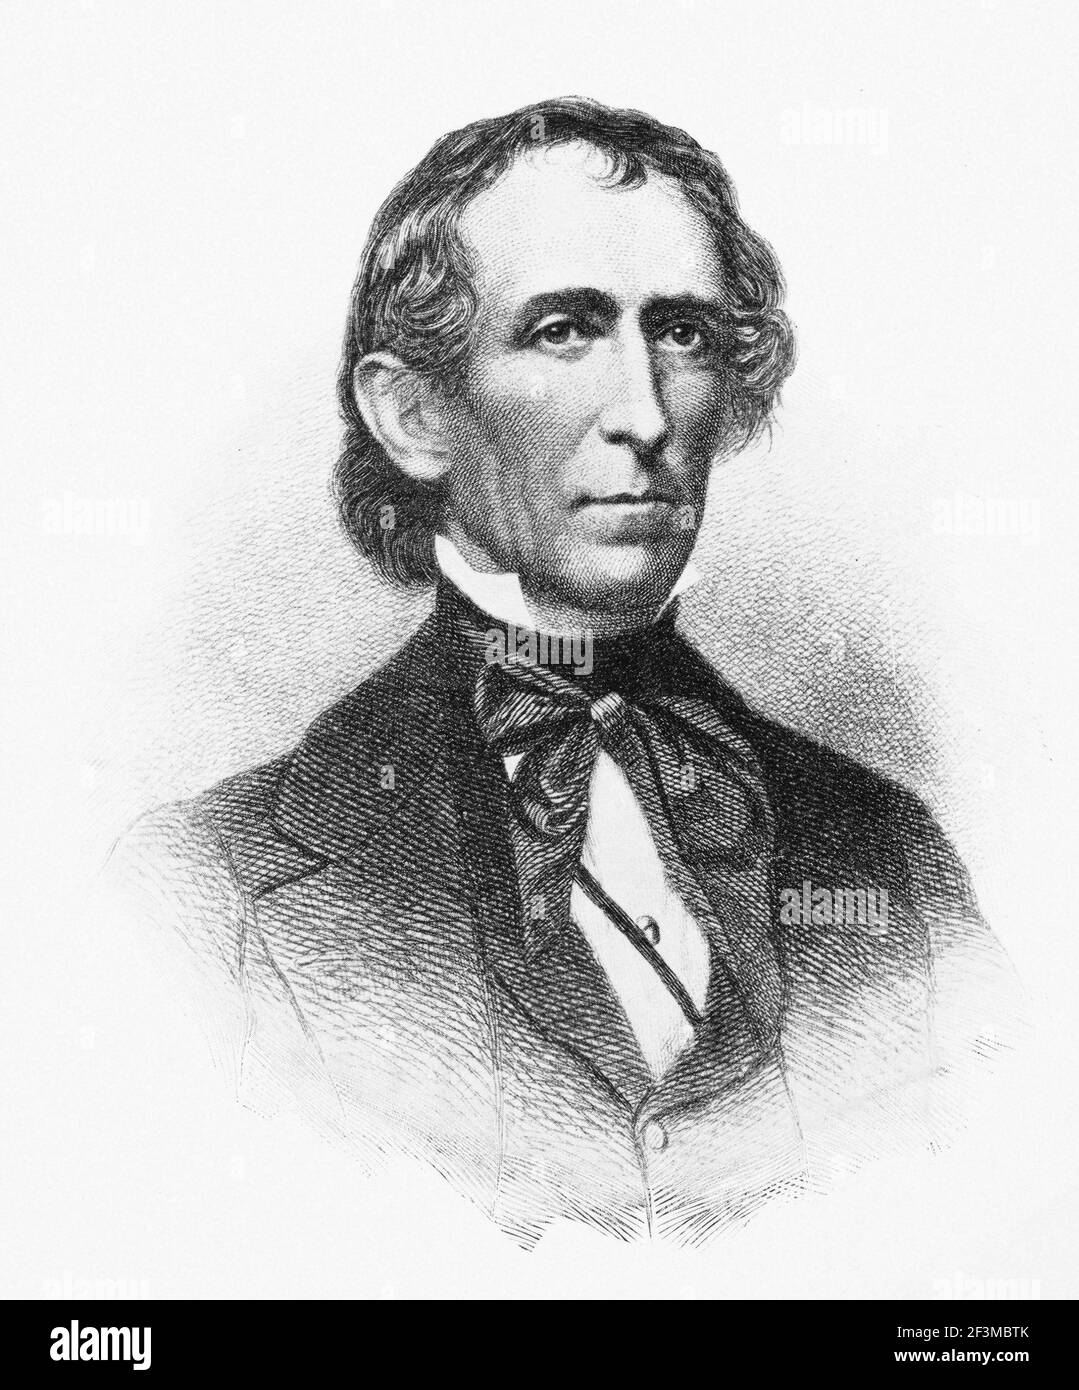 Portrait of president John Tyler. John Tyler (1790 – 1862) was the tenth president of the United States from 1841 to 1845 after briefly serving as the Stock Photo